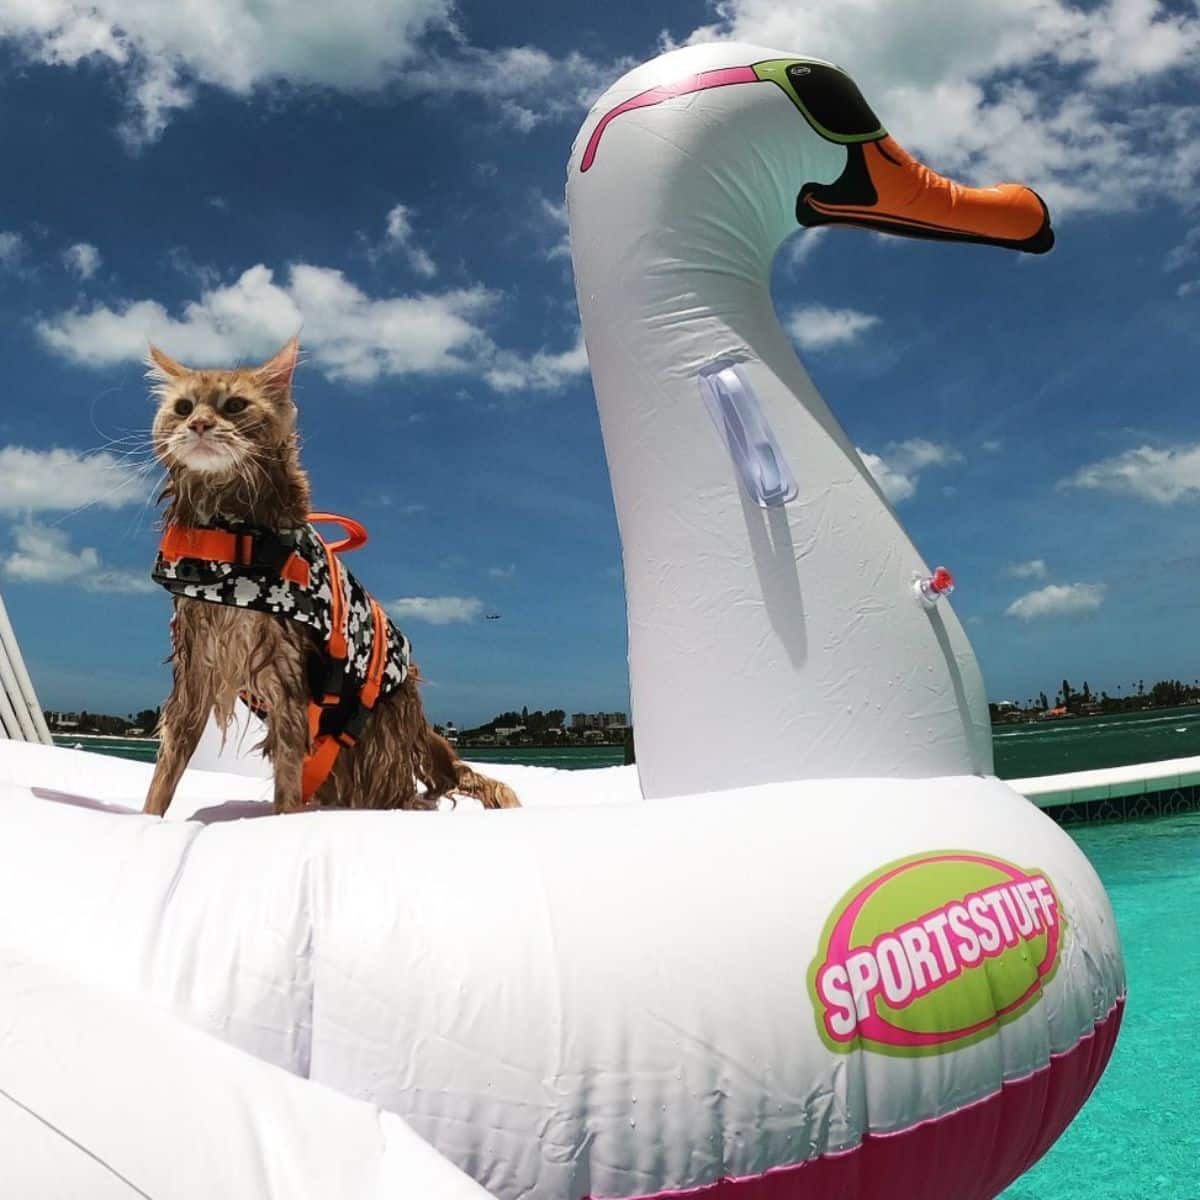 A ginger maine coon with a harness sitting on a floaty swan.